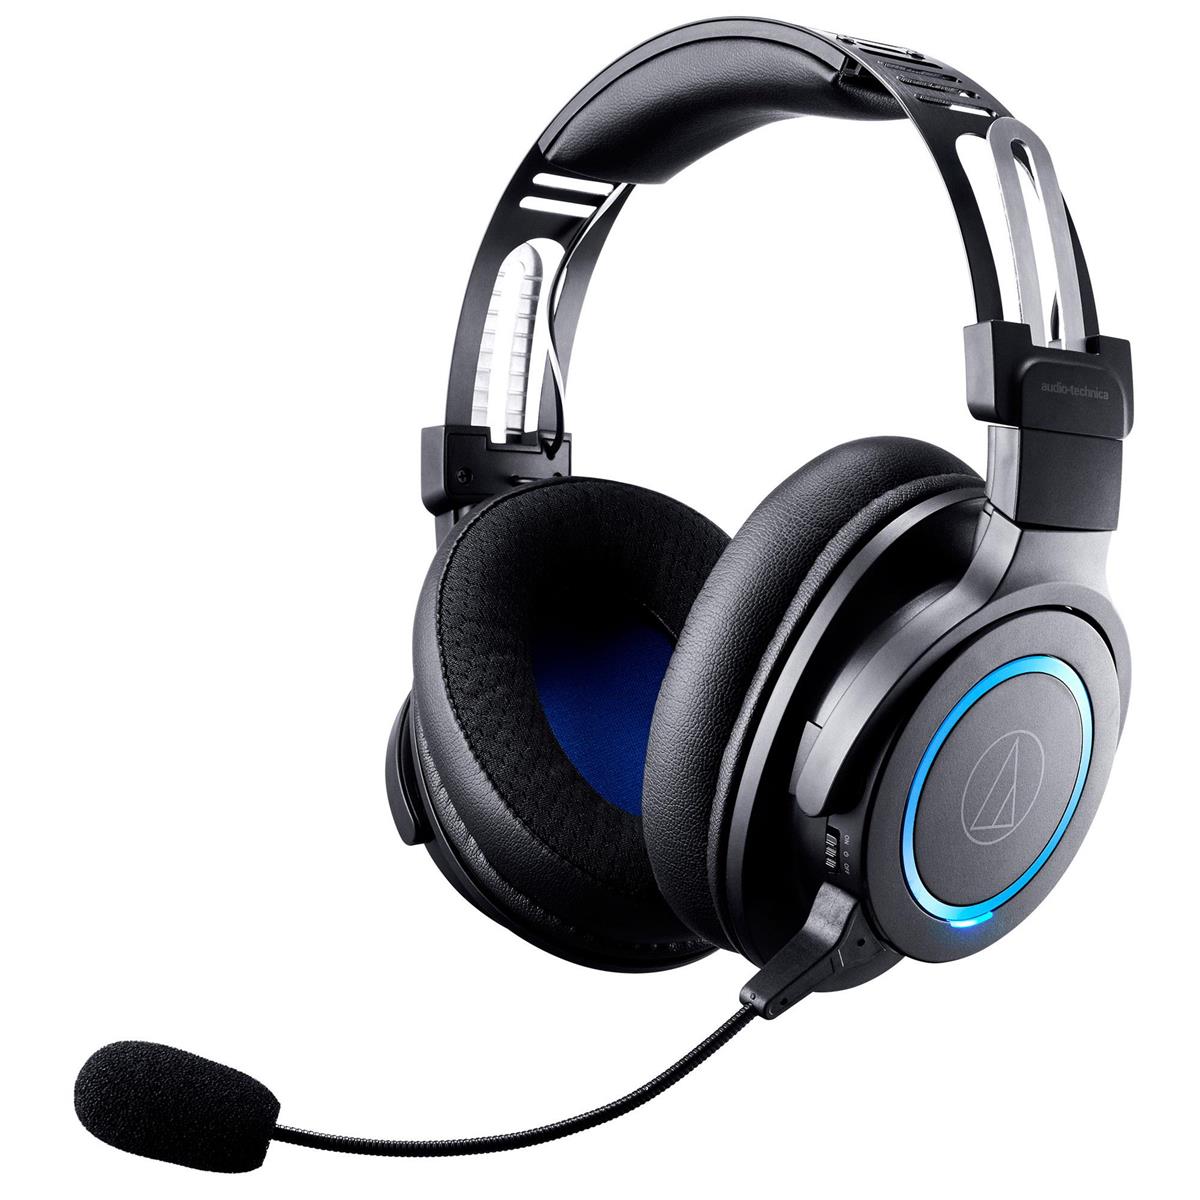 Image of Audio-Technica ATH-G1WL Premium Wireless Gaming Headset with Boom Microphone